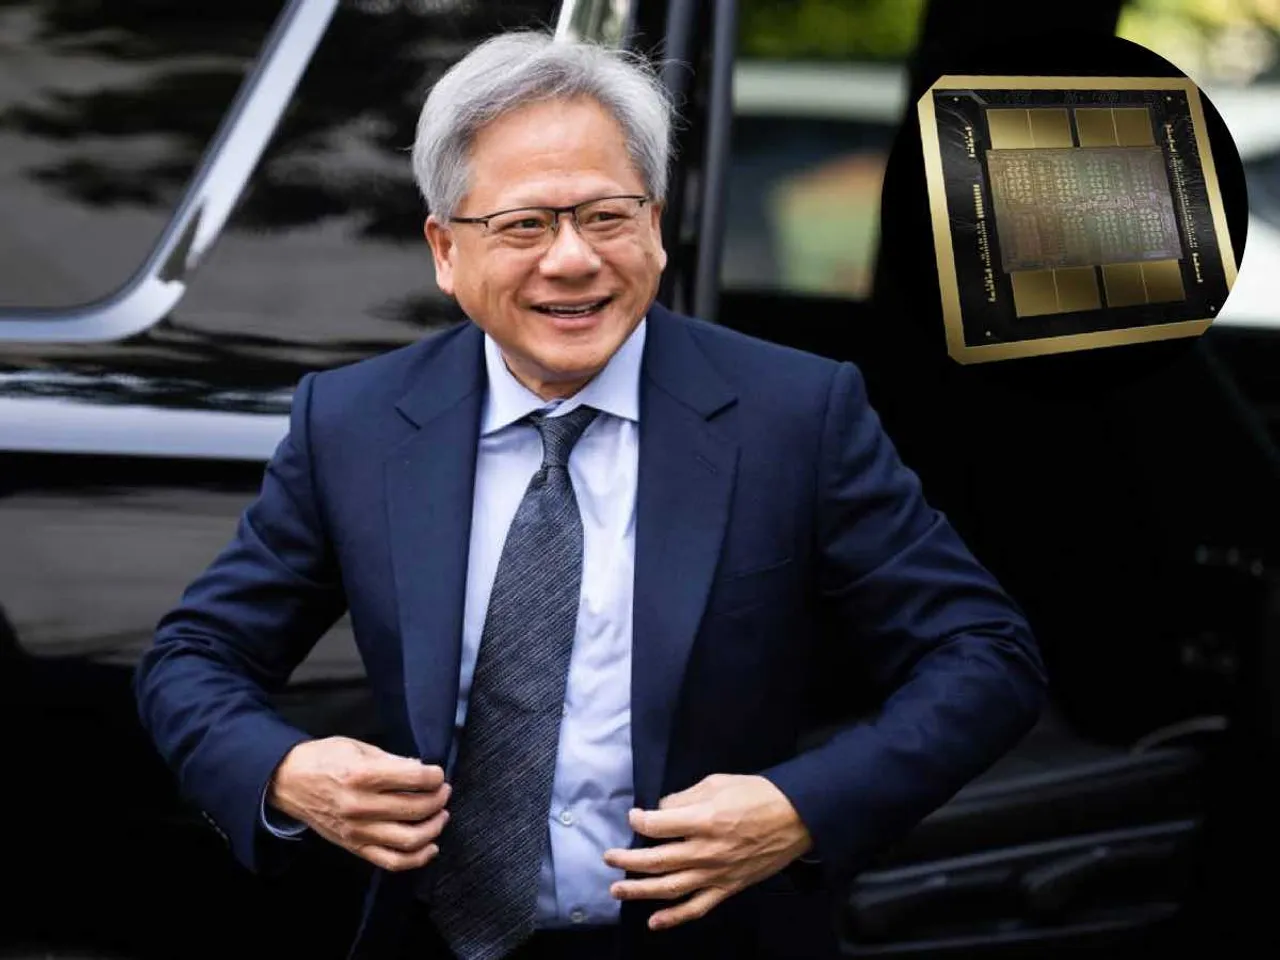 Jensen Huang and a image of the New Blackwell AI Chip